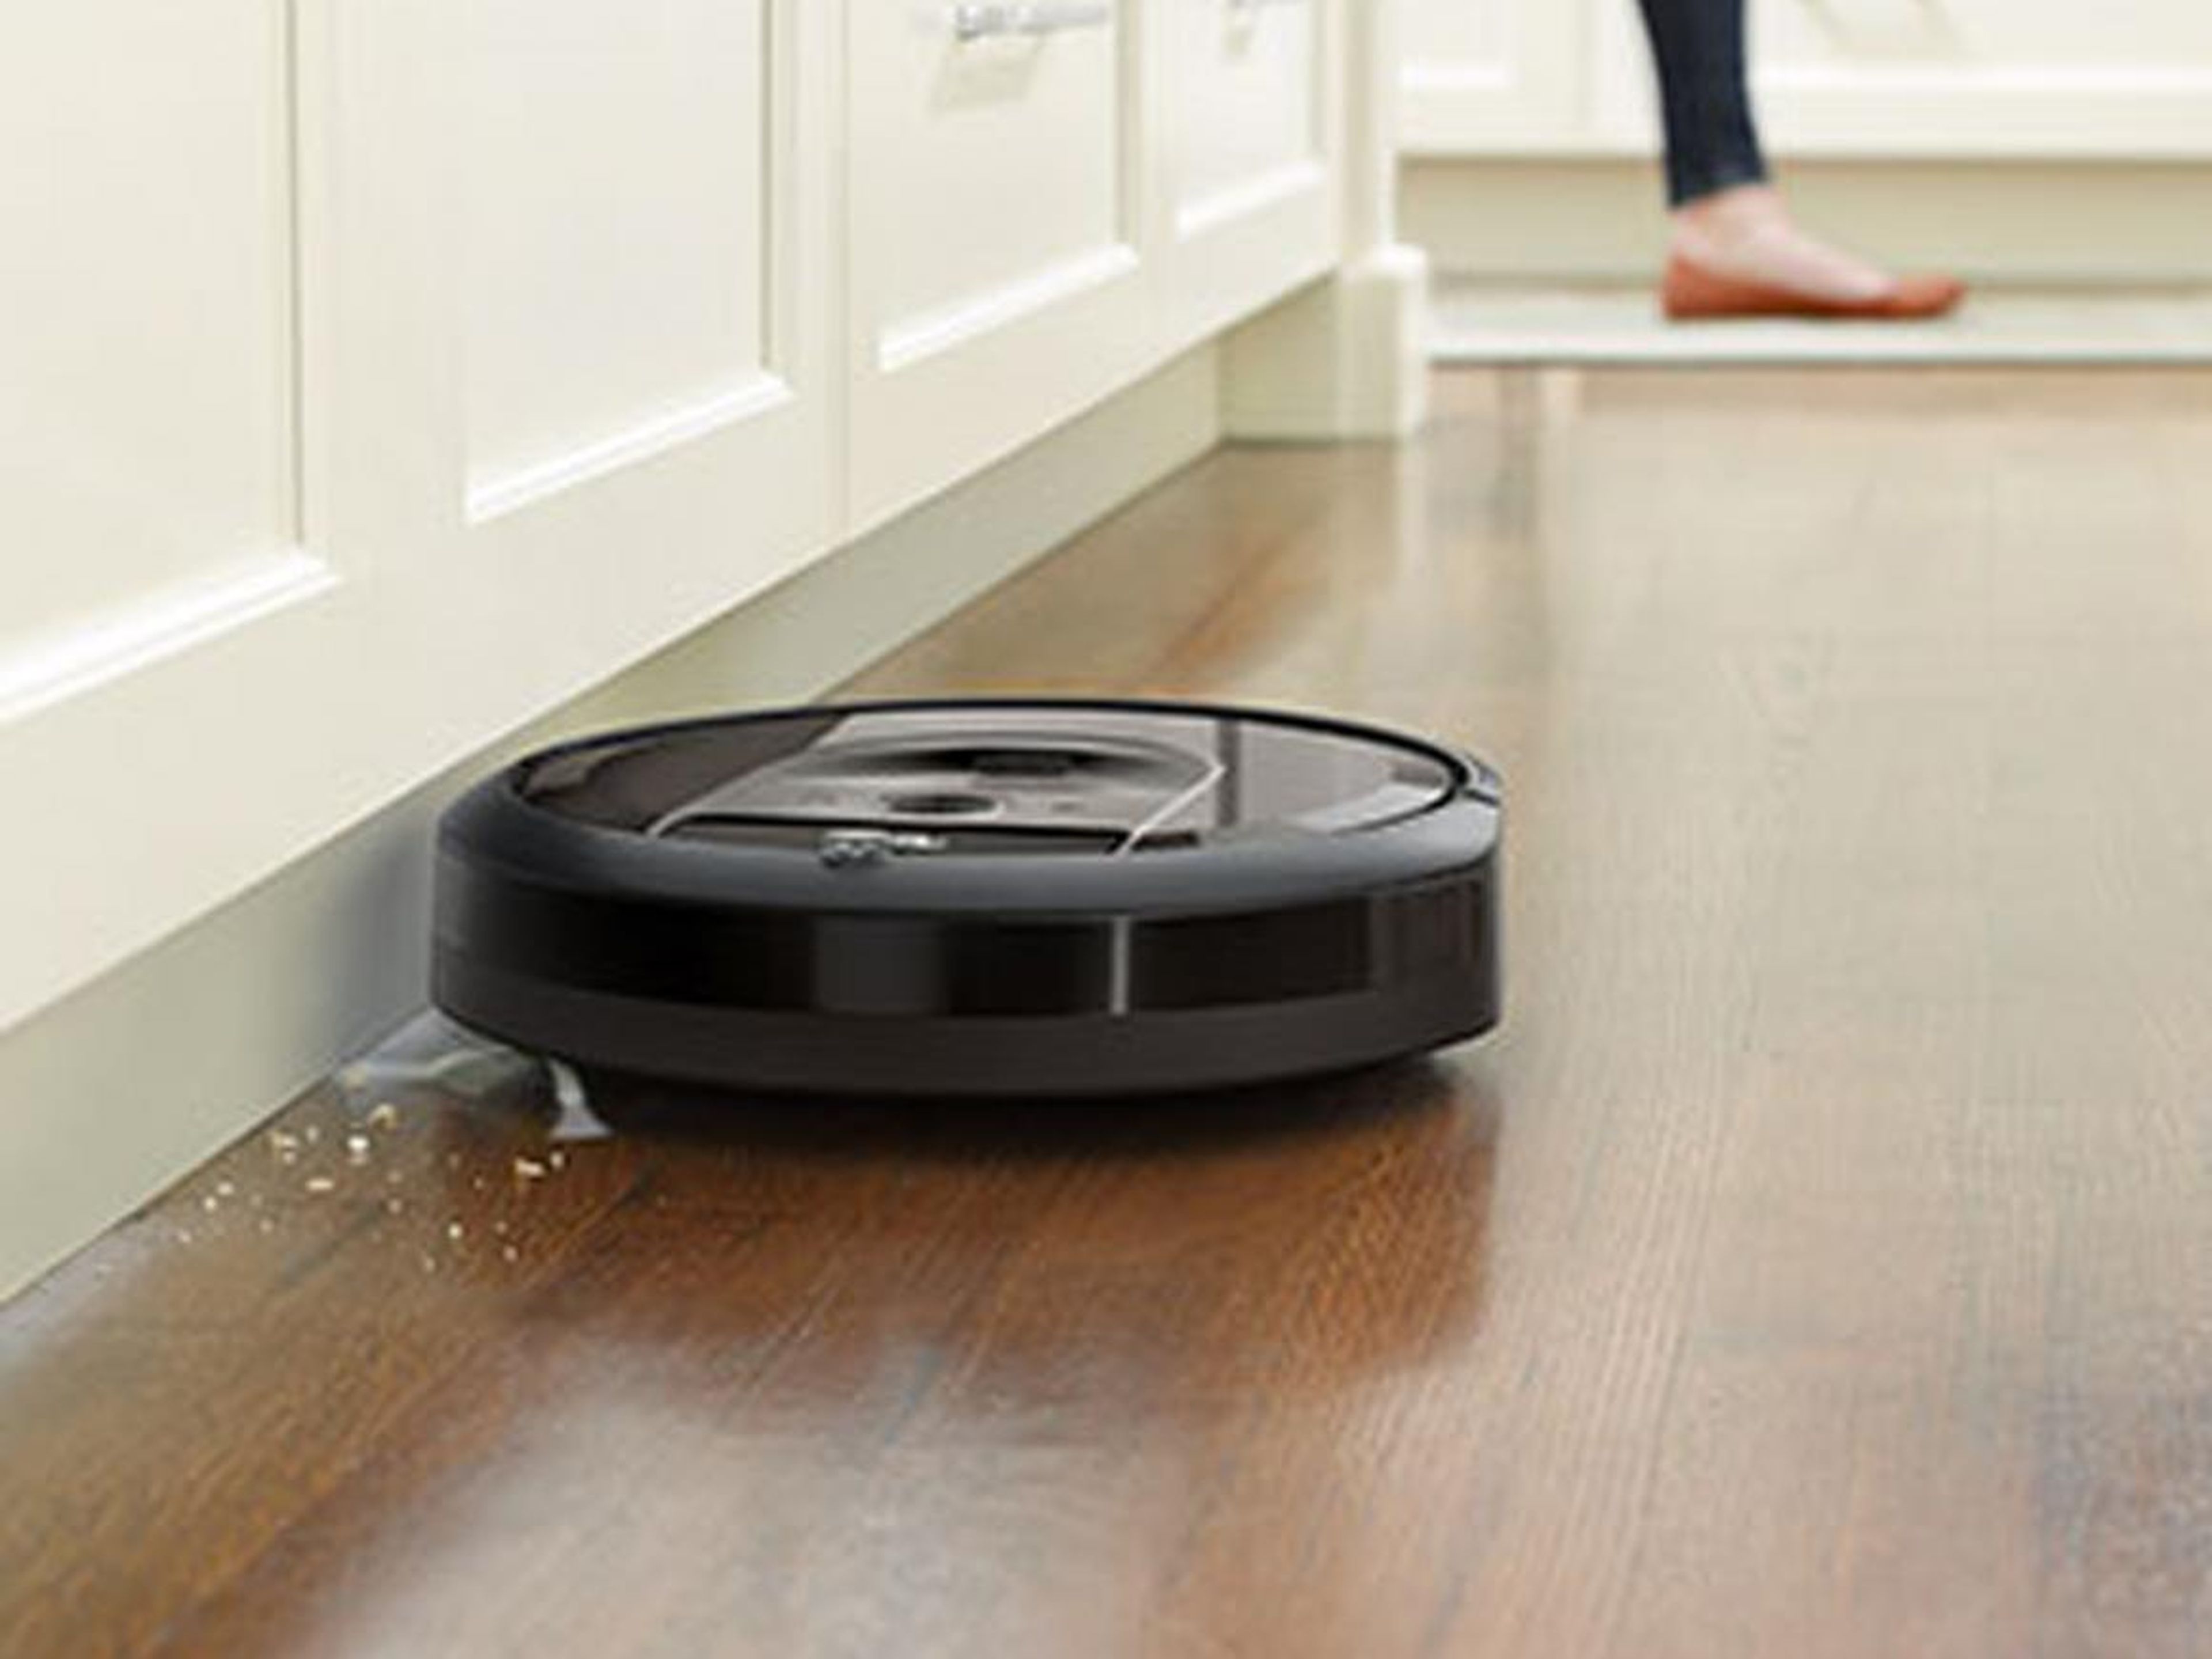 The new $1,100 Roomba has ruined all other robot vacuums for me — it cleans out its own dustbin so I pretty much never have to think about it